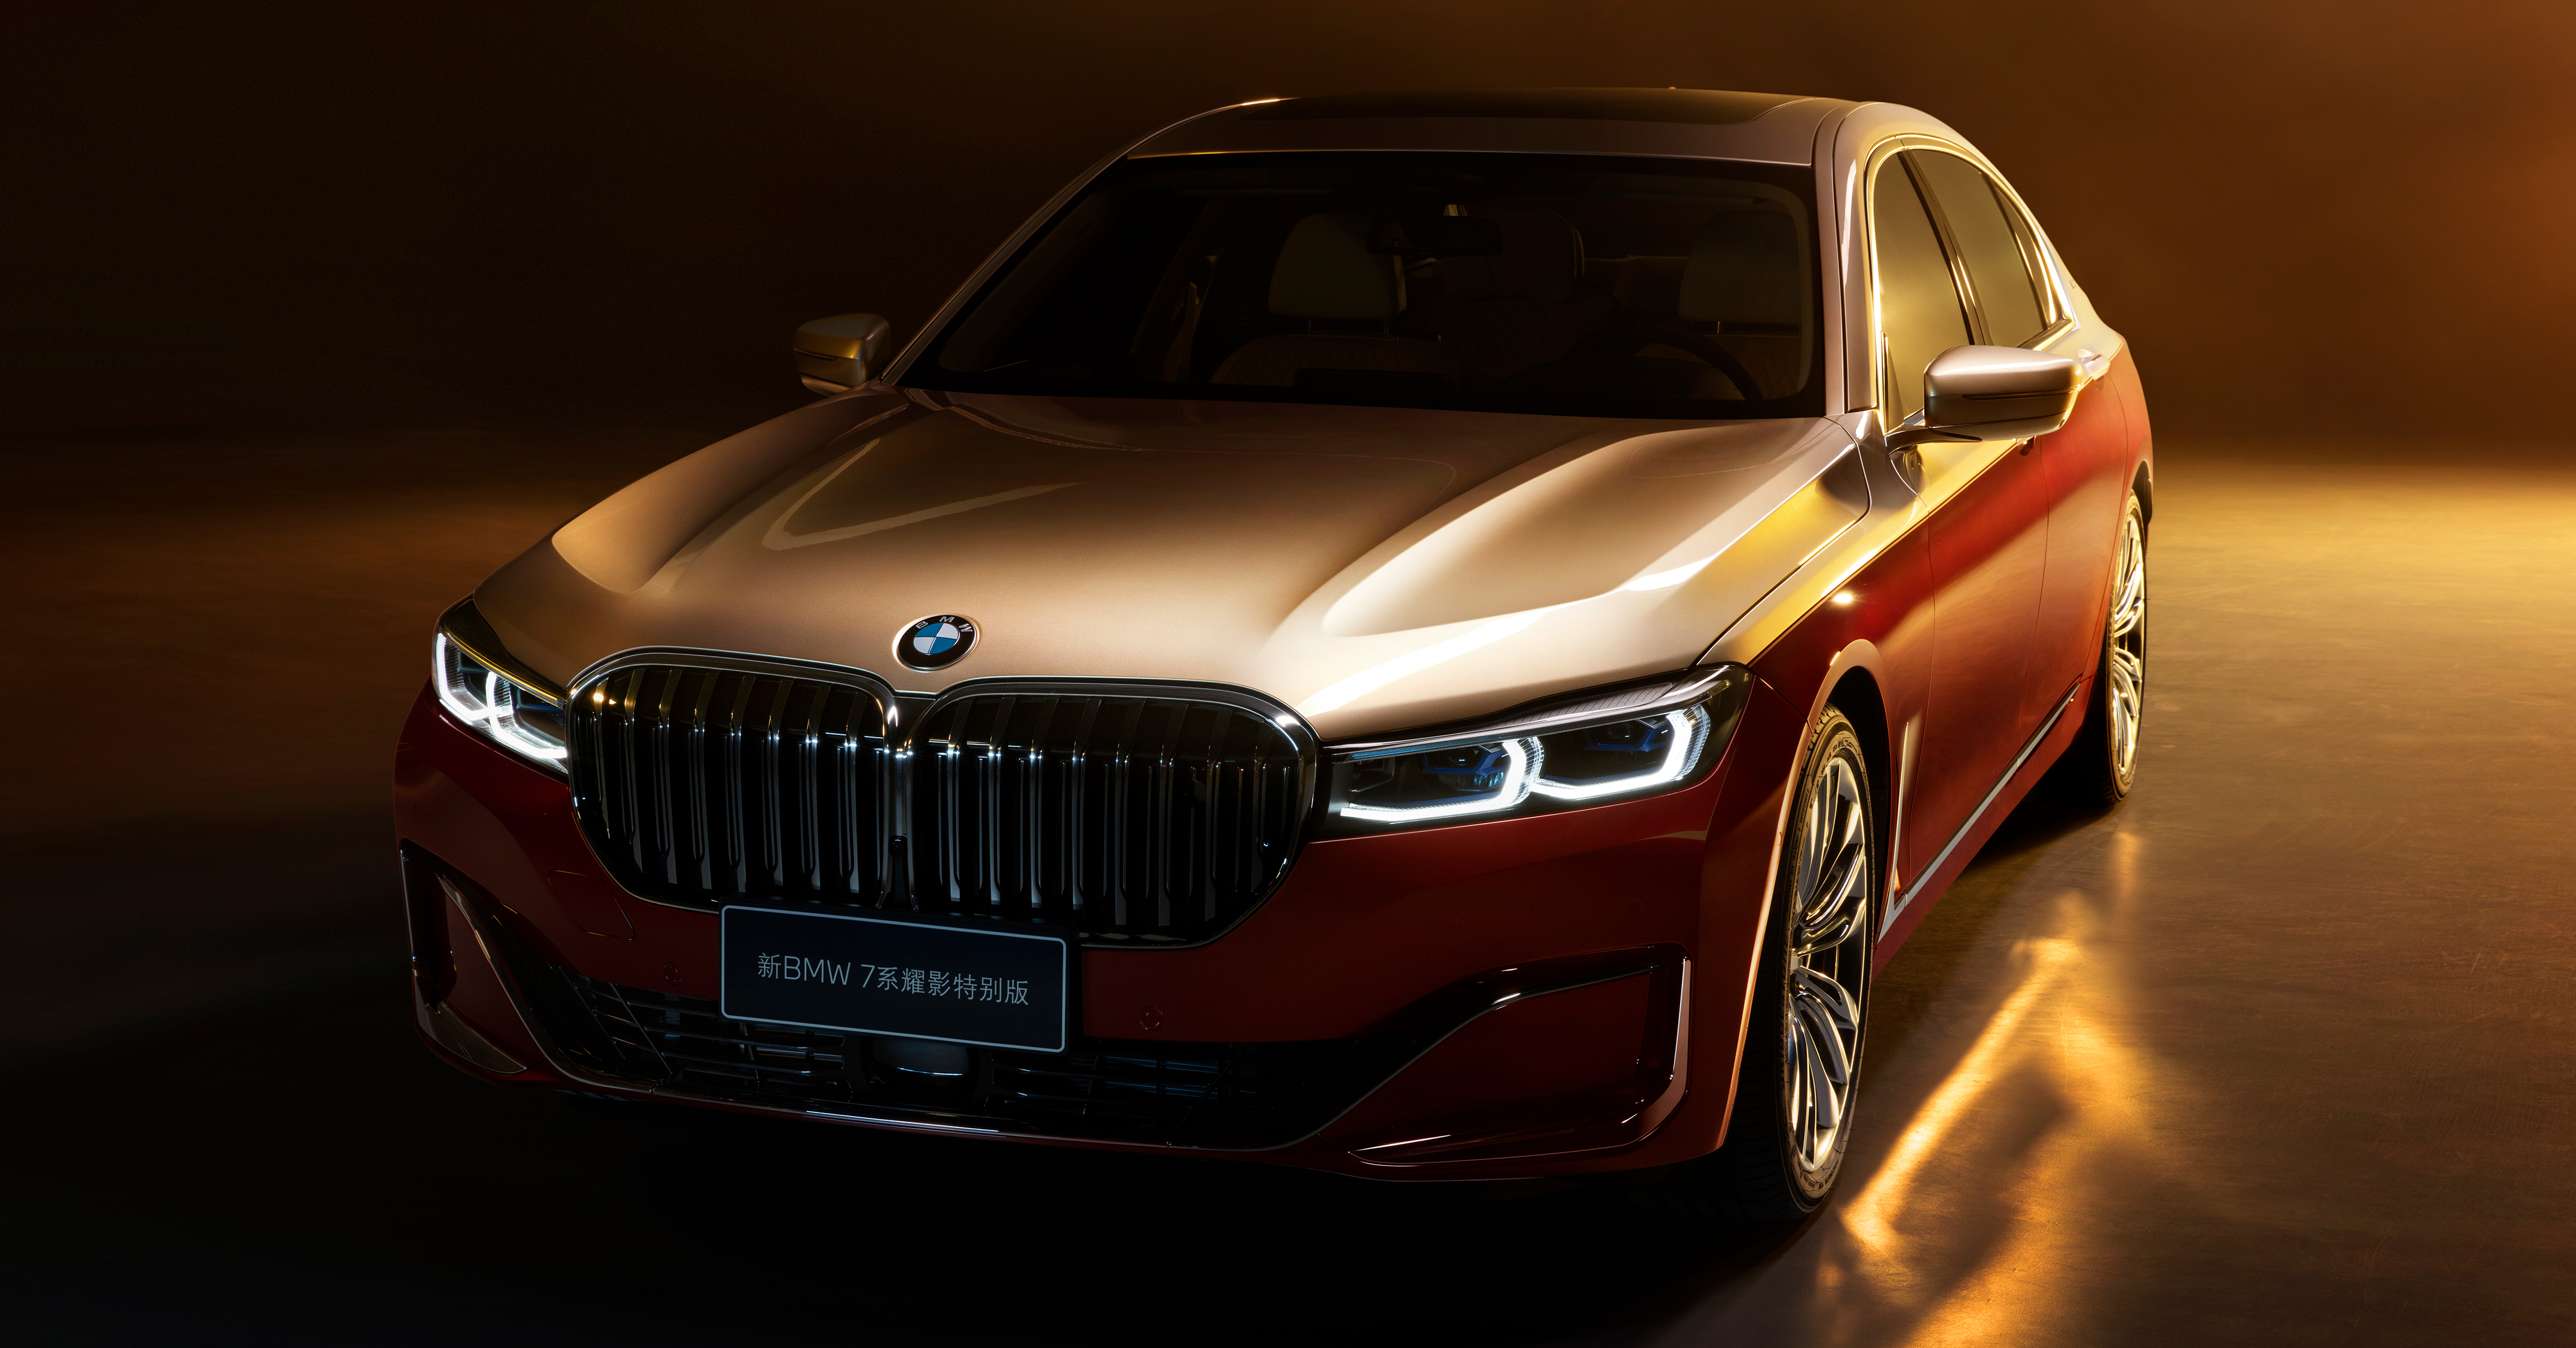 G12 BMW 7 Series Two-Tone special edition unveiled - based on M760Li ...